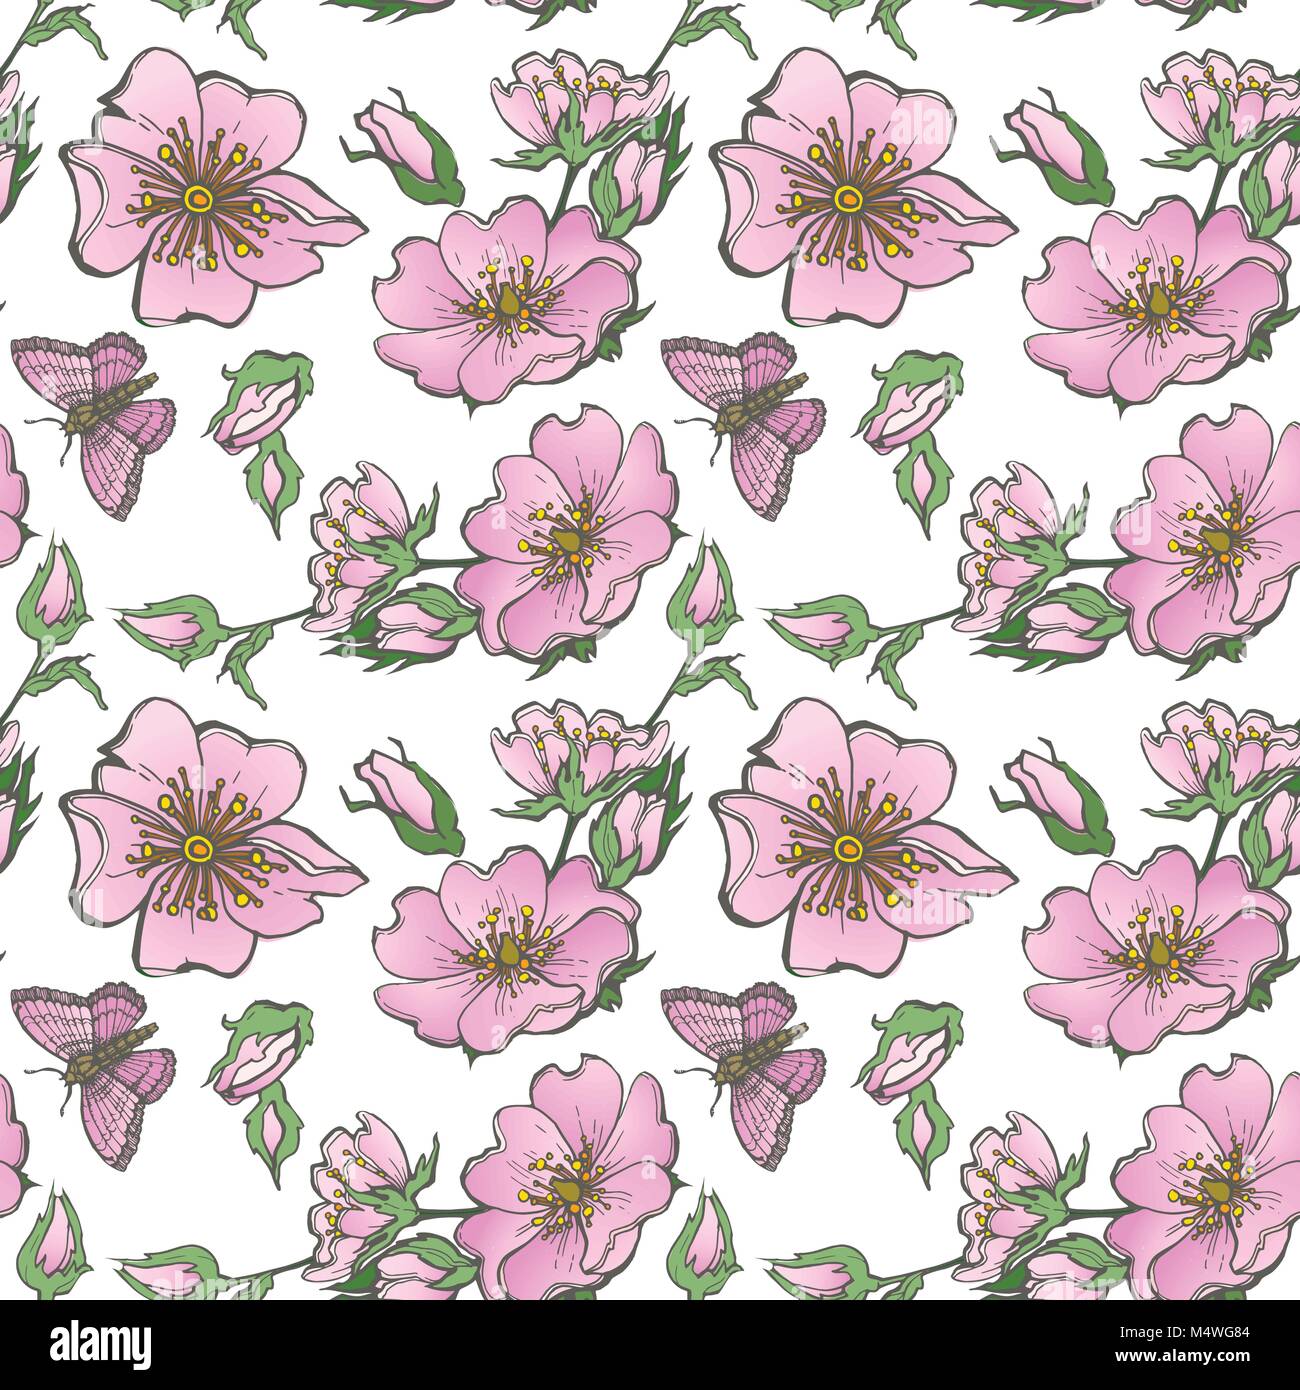 Little wild dog rose seamless background flowers with buds pattern boho style Stock Vector